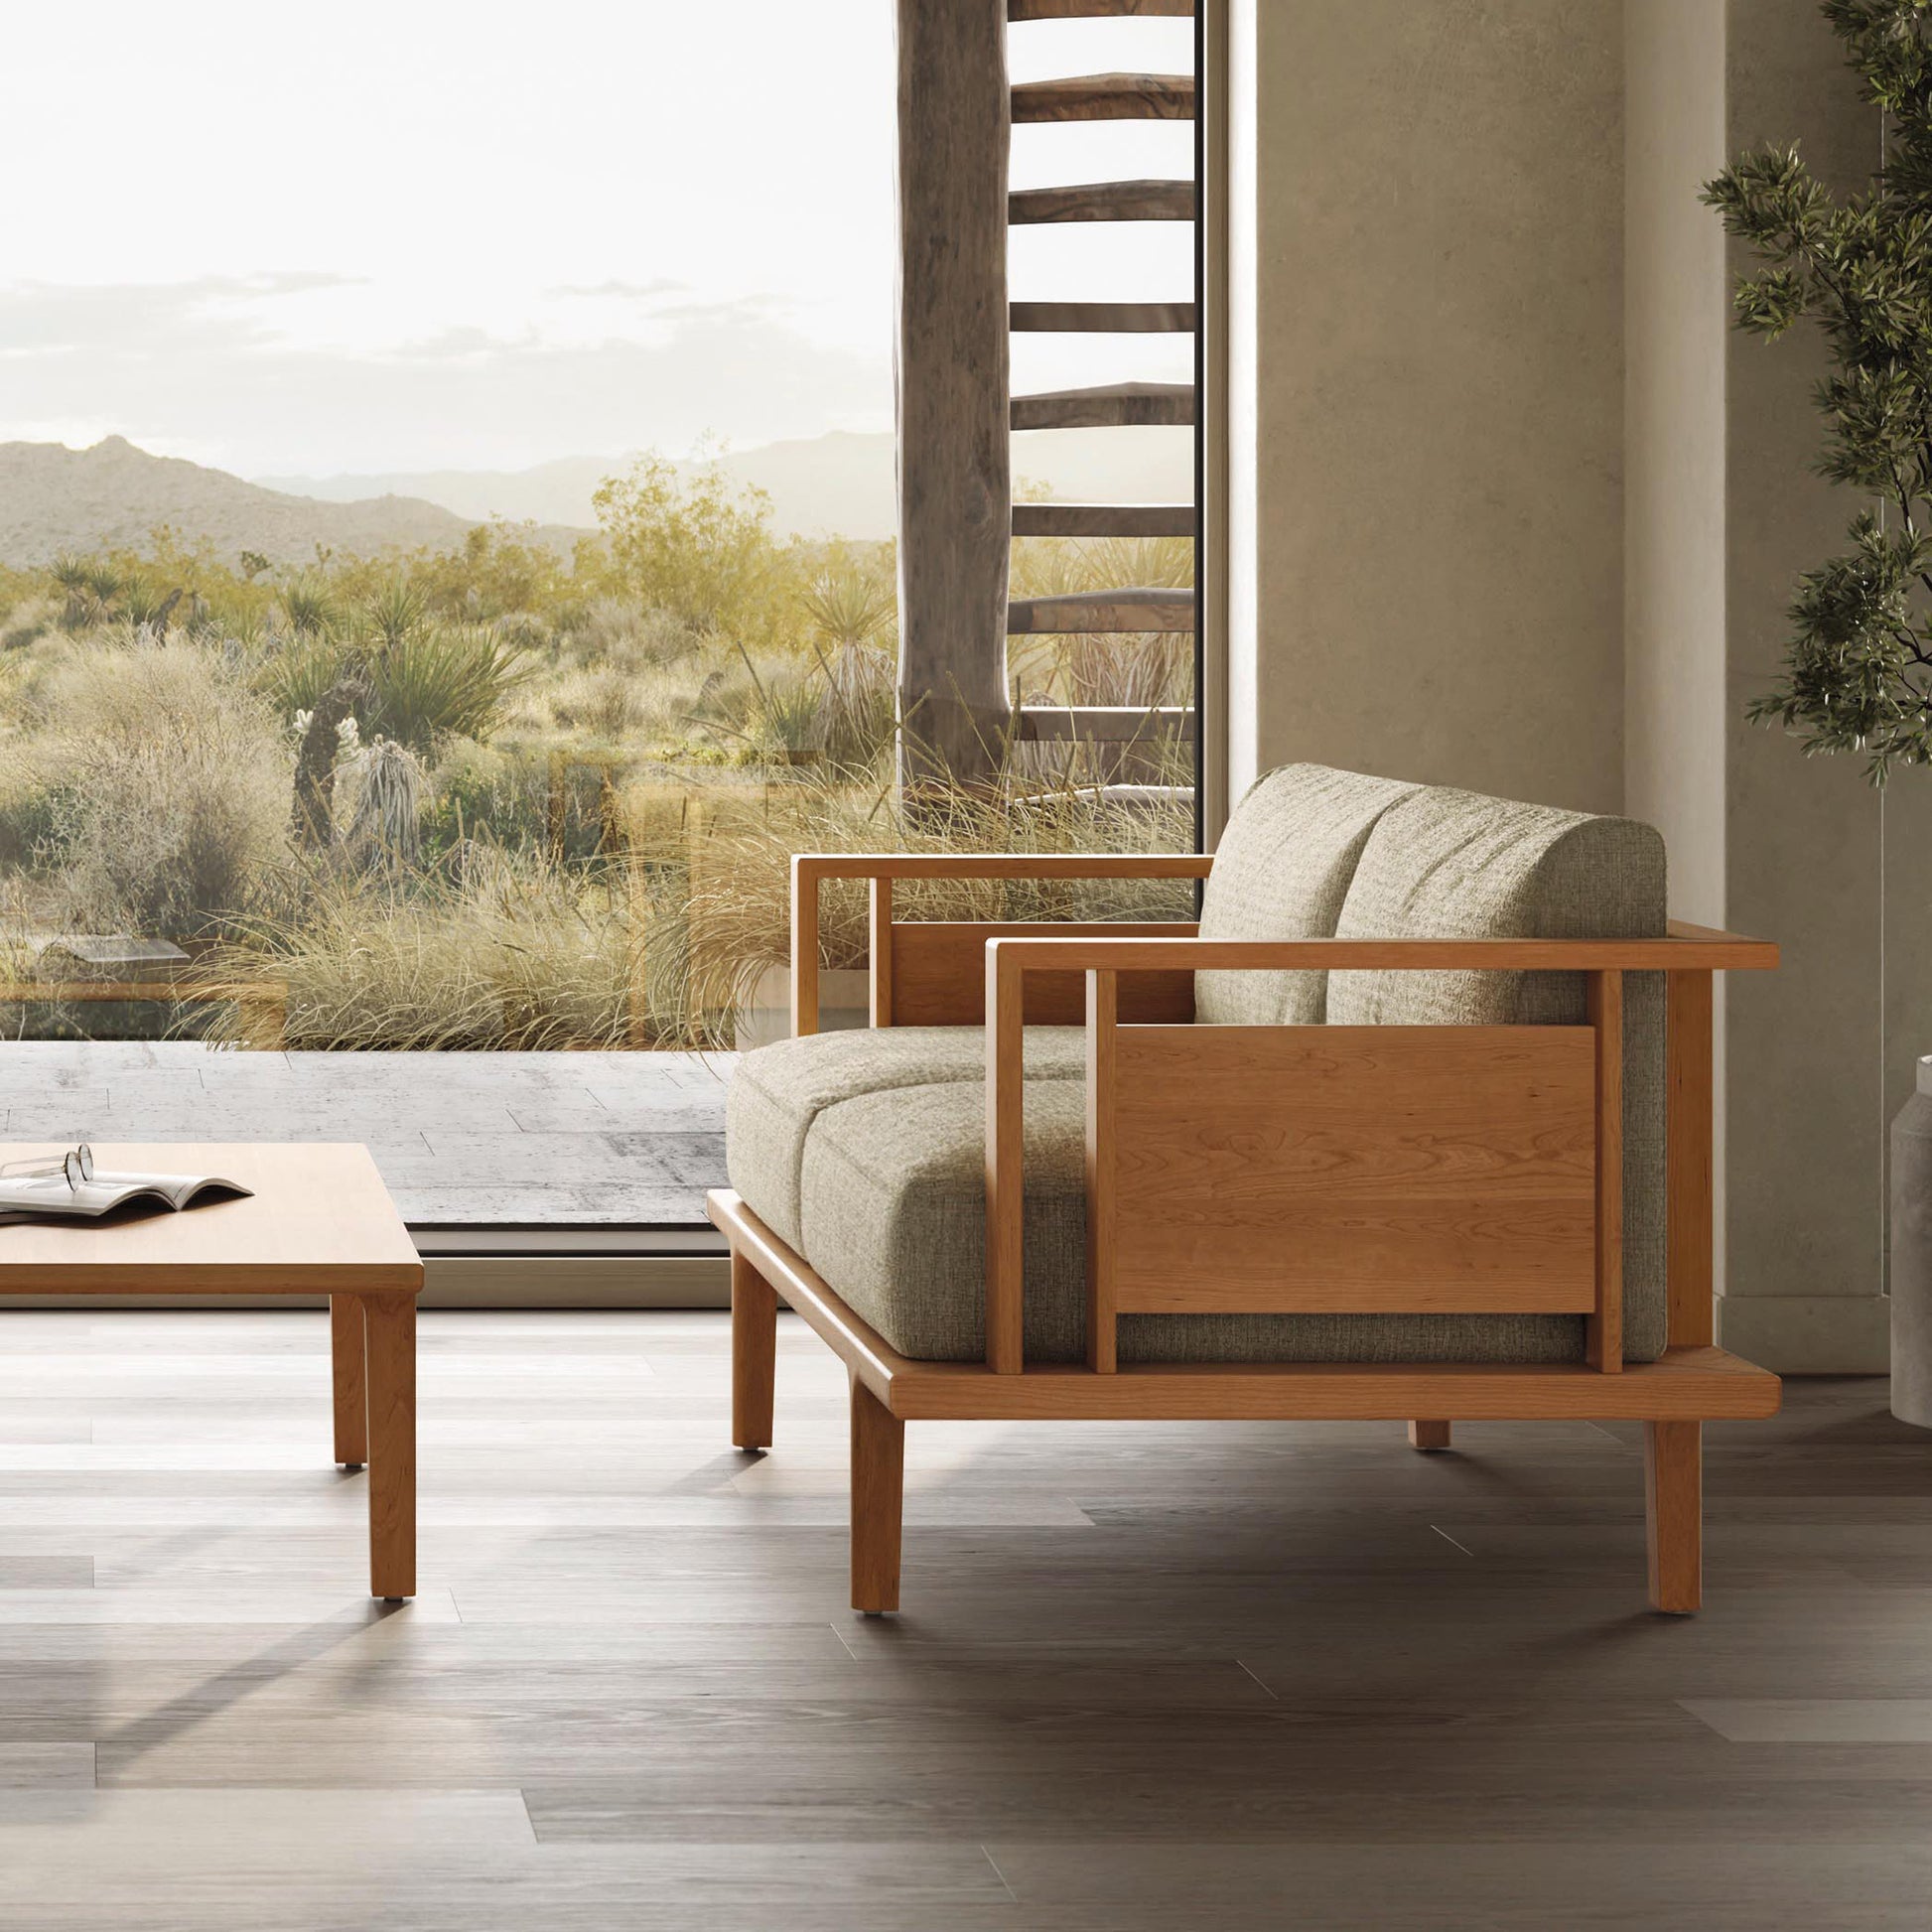 Modern armchair with beige custom upholstery and wooden frame, placed in a room with large windows overlooking a desert landscape.